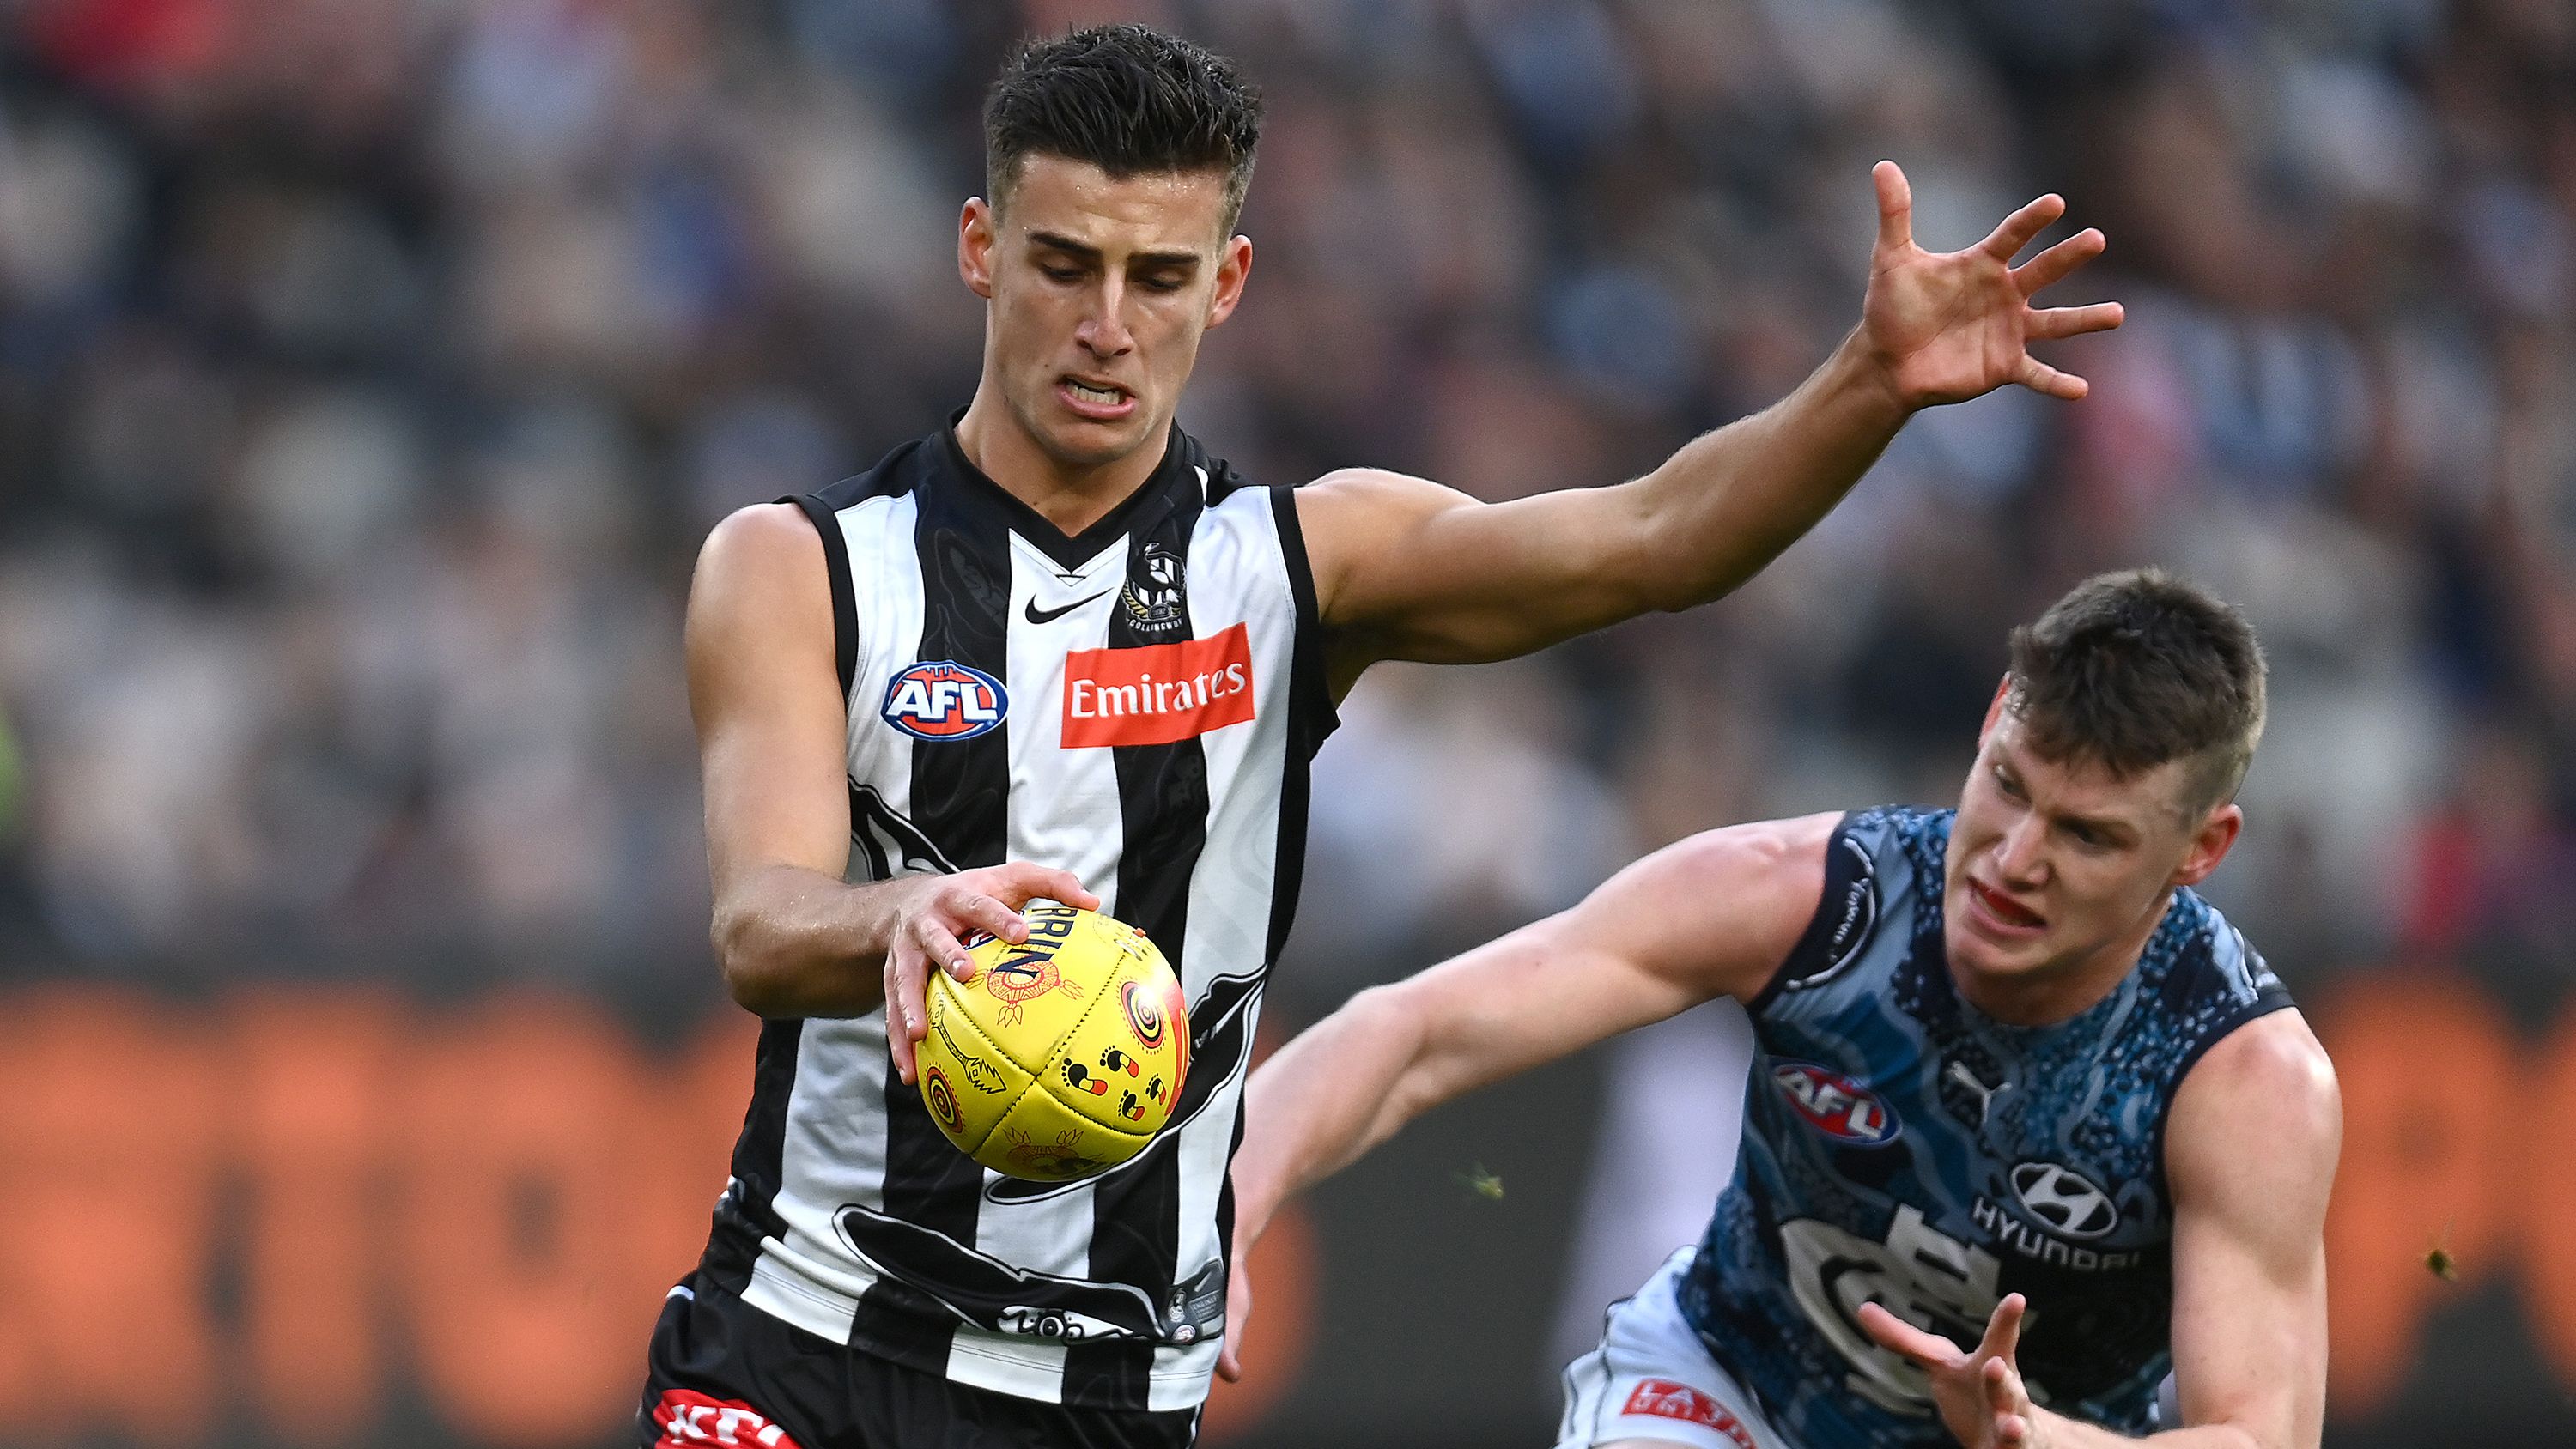 Nick Daicos making a case as the best first-year player ever, says Matthew Lloyd